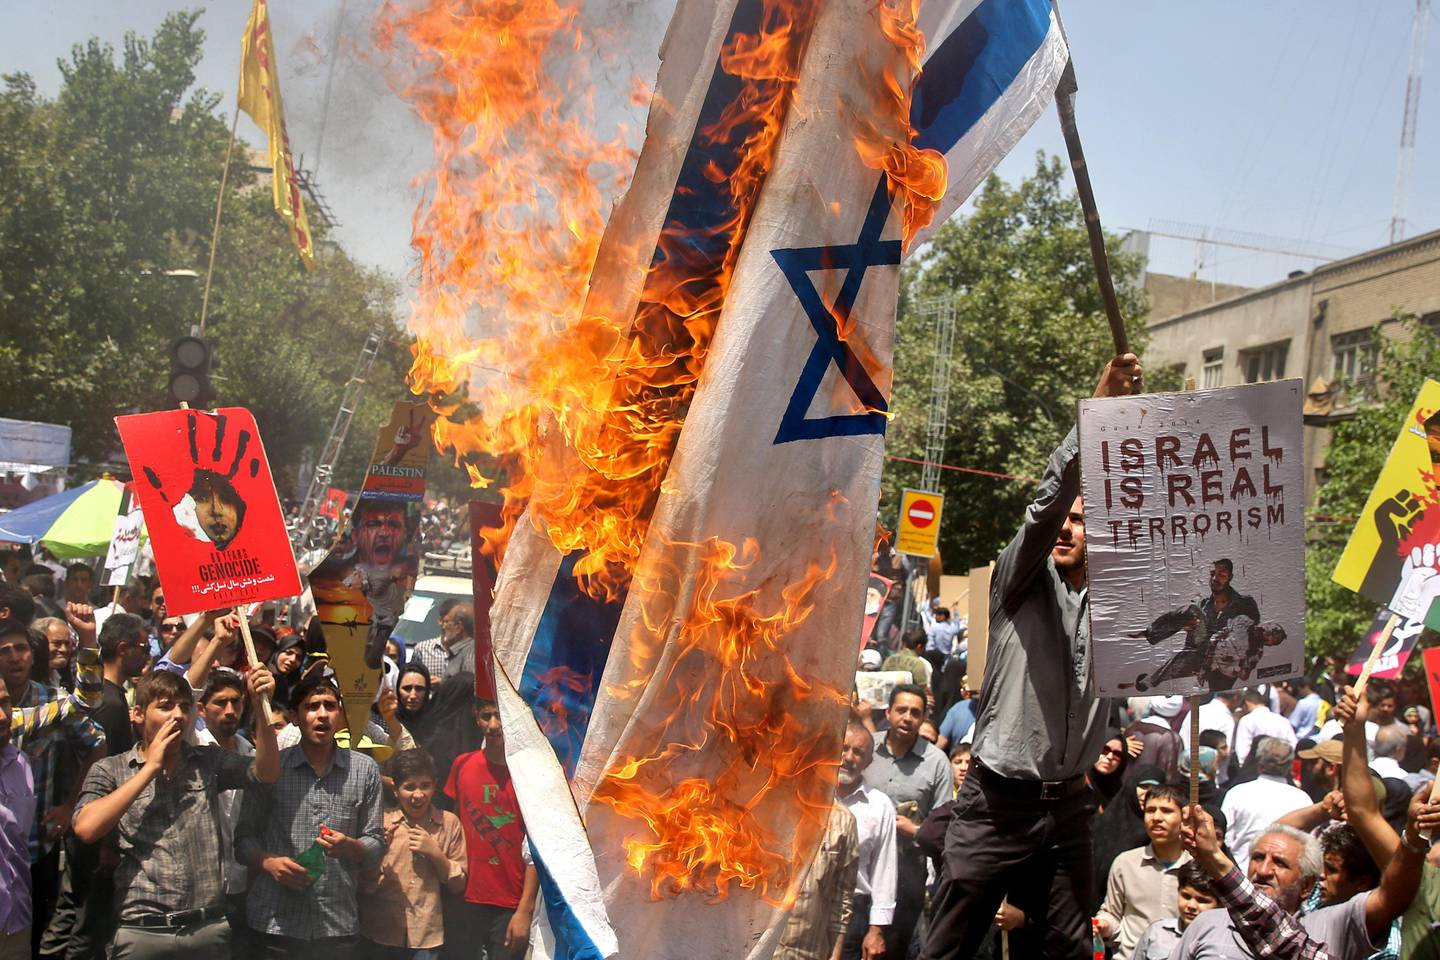 Iranians burn a representation of an Israeli flag as they chant slogans during an annual pro-Palestinian rally marking Al-Quds (Jerusalem) Day in Tehran, Iran, Friday, July 25, 2014. "Al-Quds Day," Arabic for Jerusalem, is the last Friday of the Muslim holy month of Ramadan declared by the Iranian late spiritual leader Ayatollah Ruhollah Khomeini as an international day of struggle against Israel and for the liberation of Jerusalem. Alongside Mecca and Medina in Saudi Arabia, Jerusalem is sacred for Muslims since they believe Islam's Prophet Muhammad began his journey to heaven from there.(AP Photo/Ebrahim Noroozi)